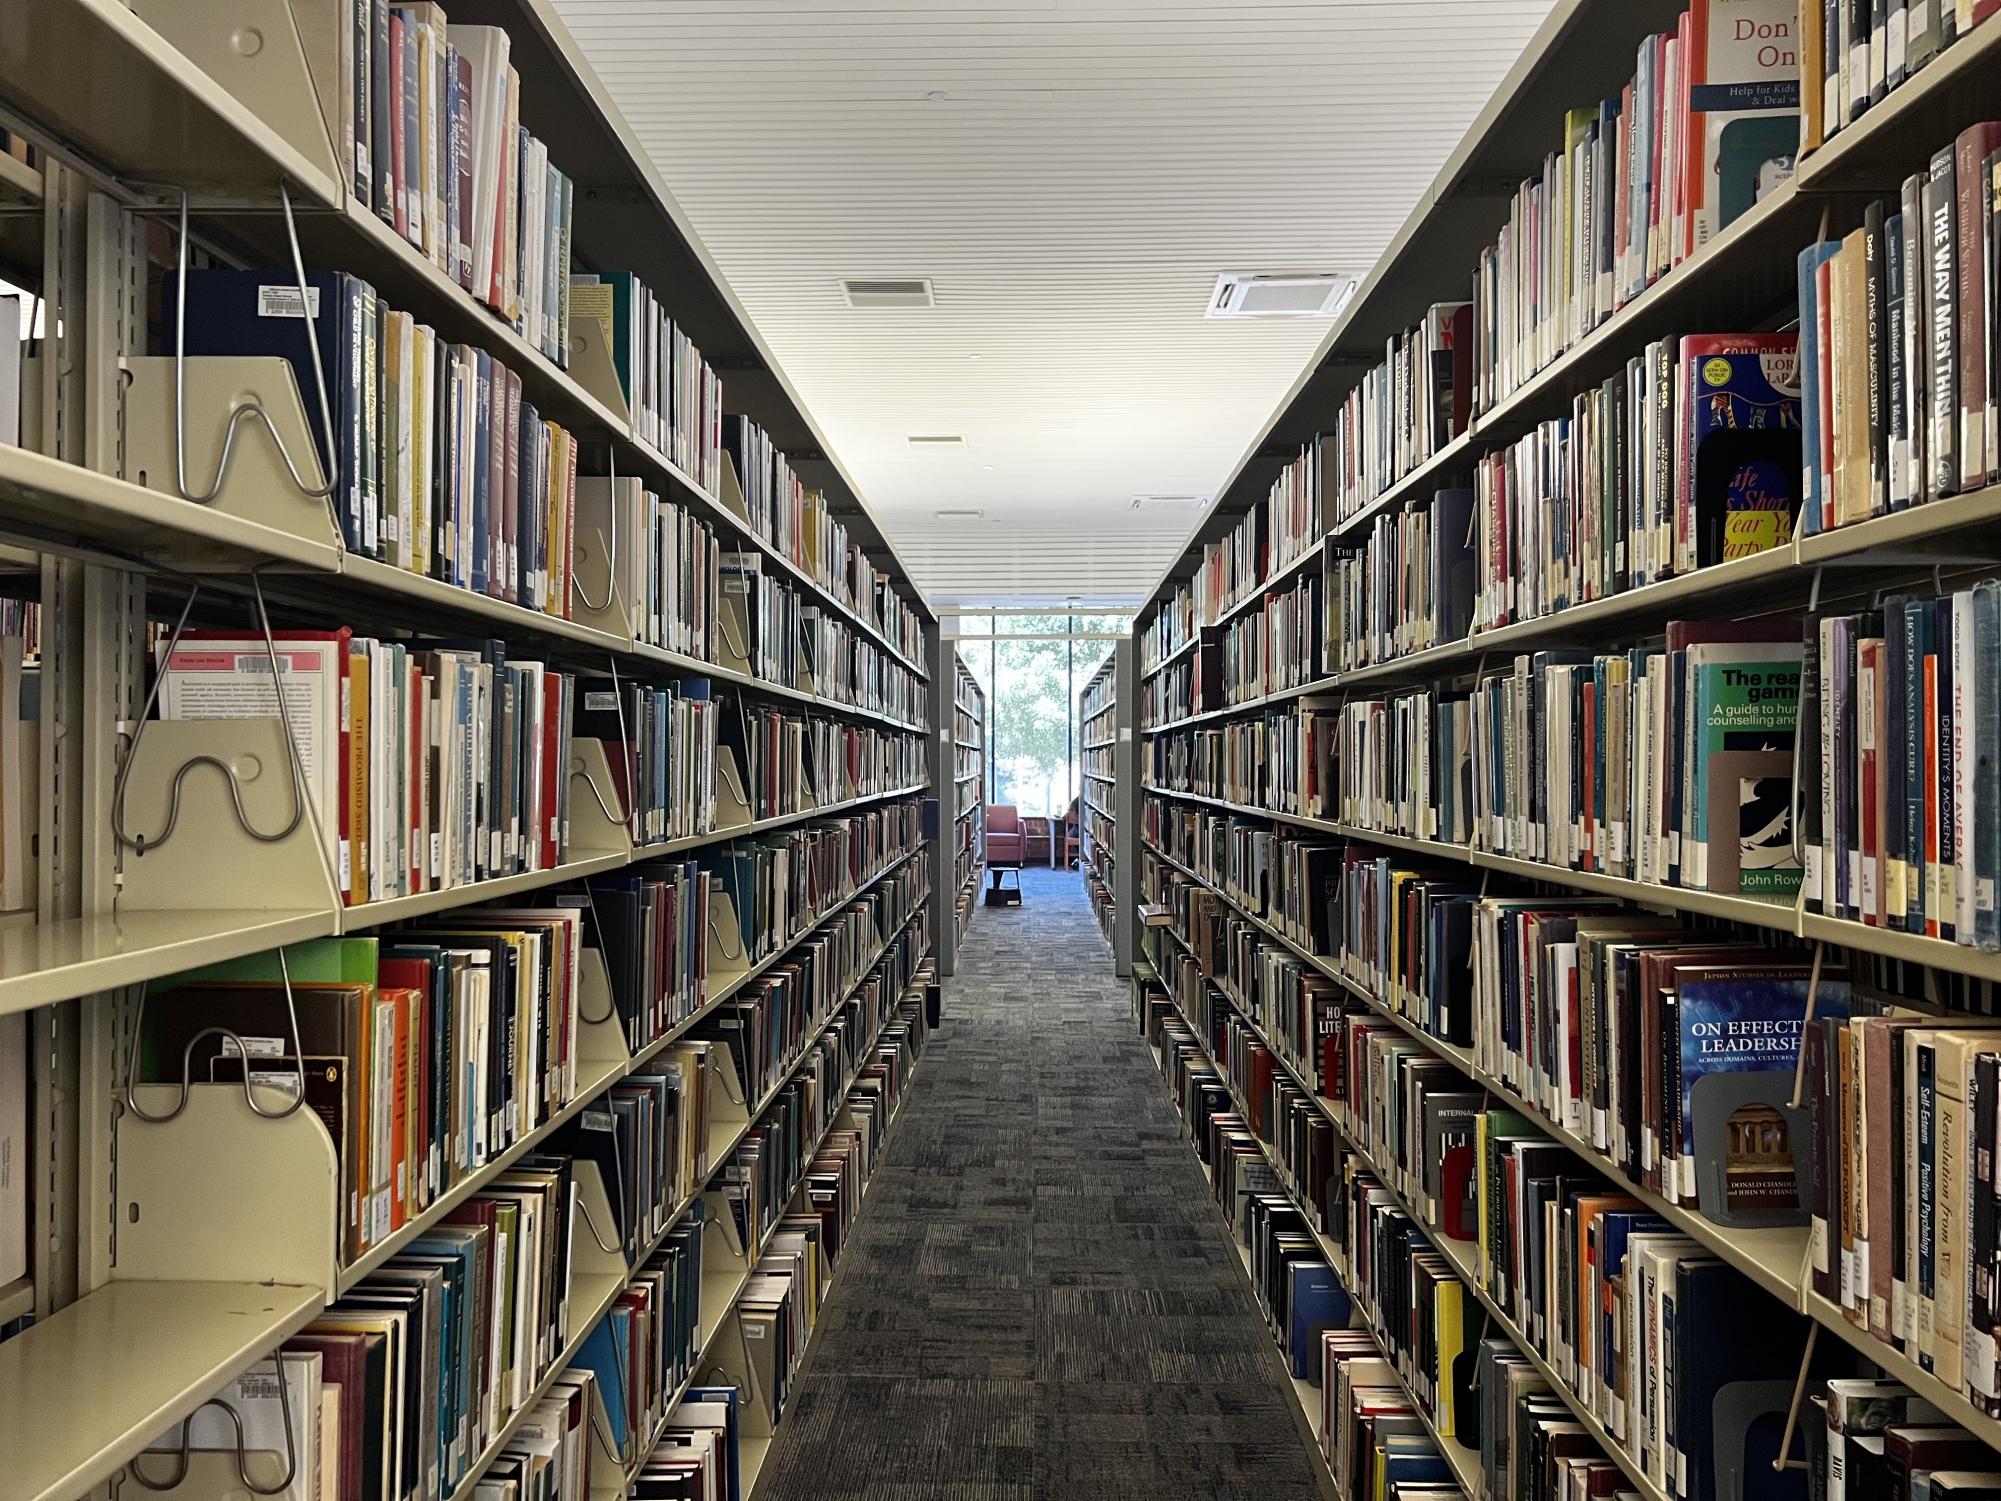 Pearson Library at California Lutheran University offers a wide range of titles, including children’s books.